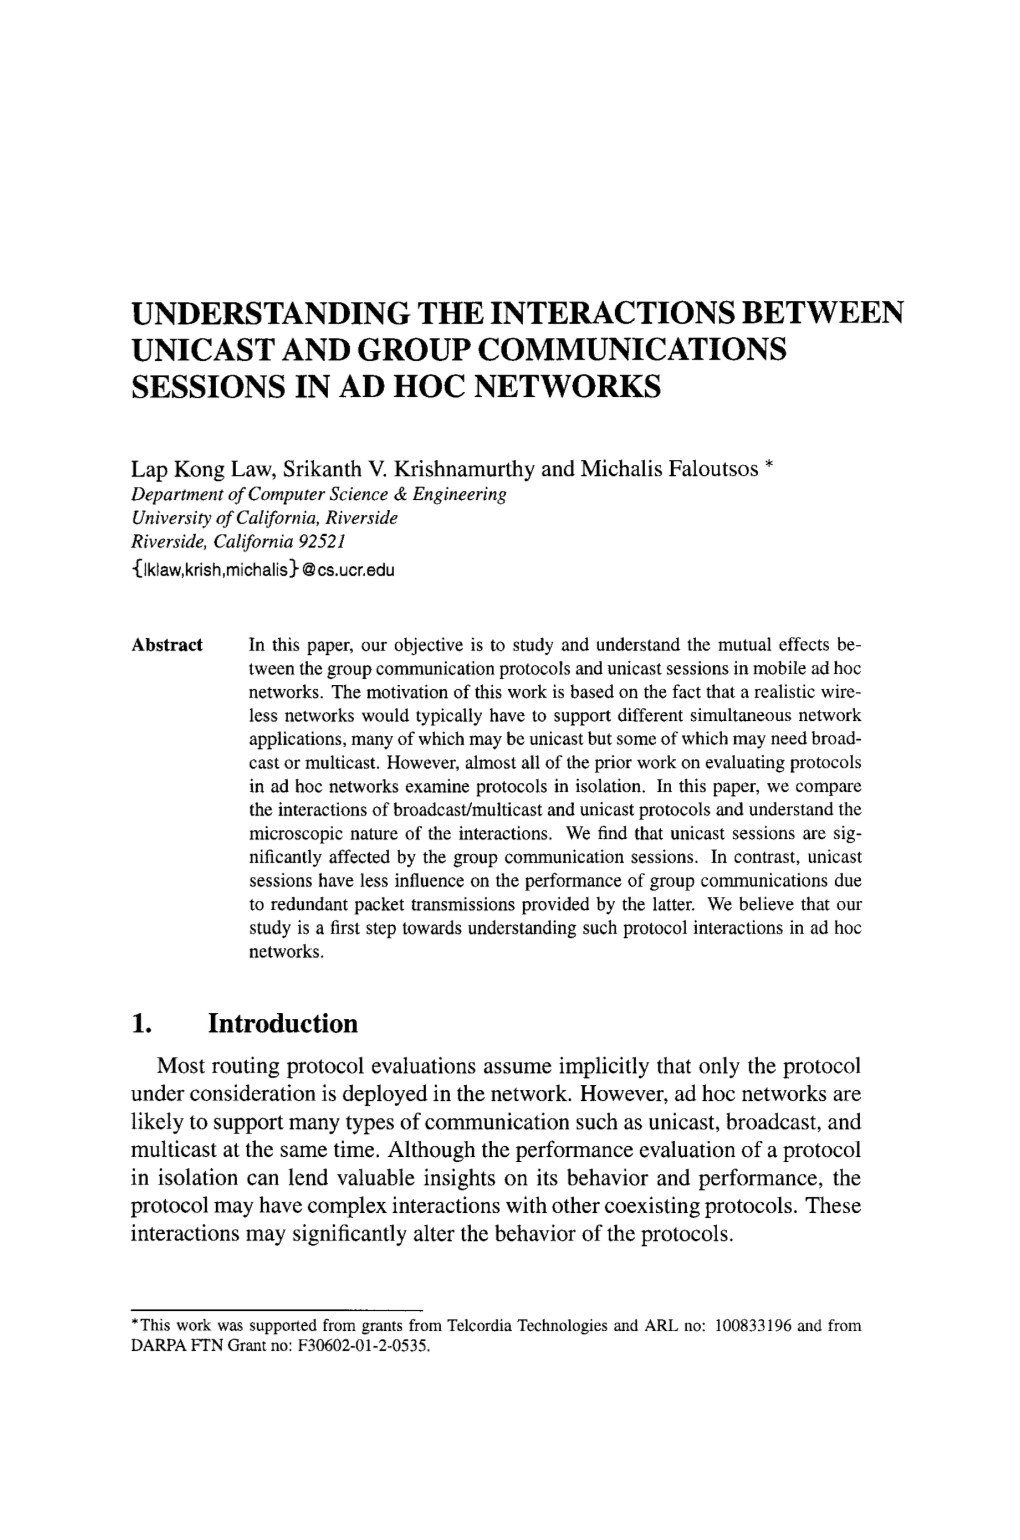 Understanding the Interactions Between Unicast and Group Communications Sessions in Ad Hoc Networks